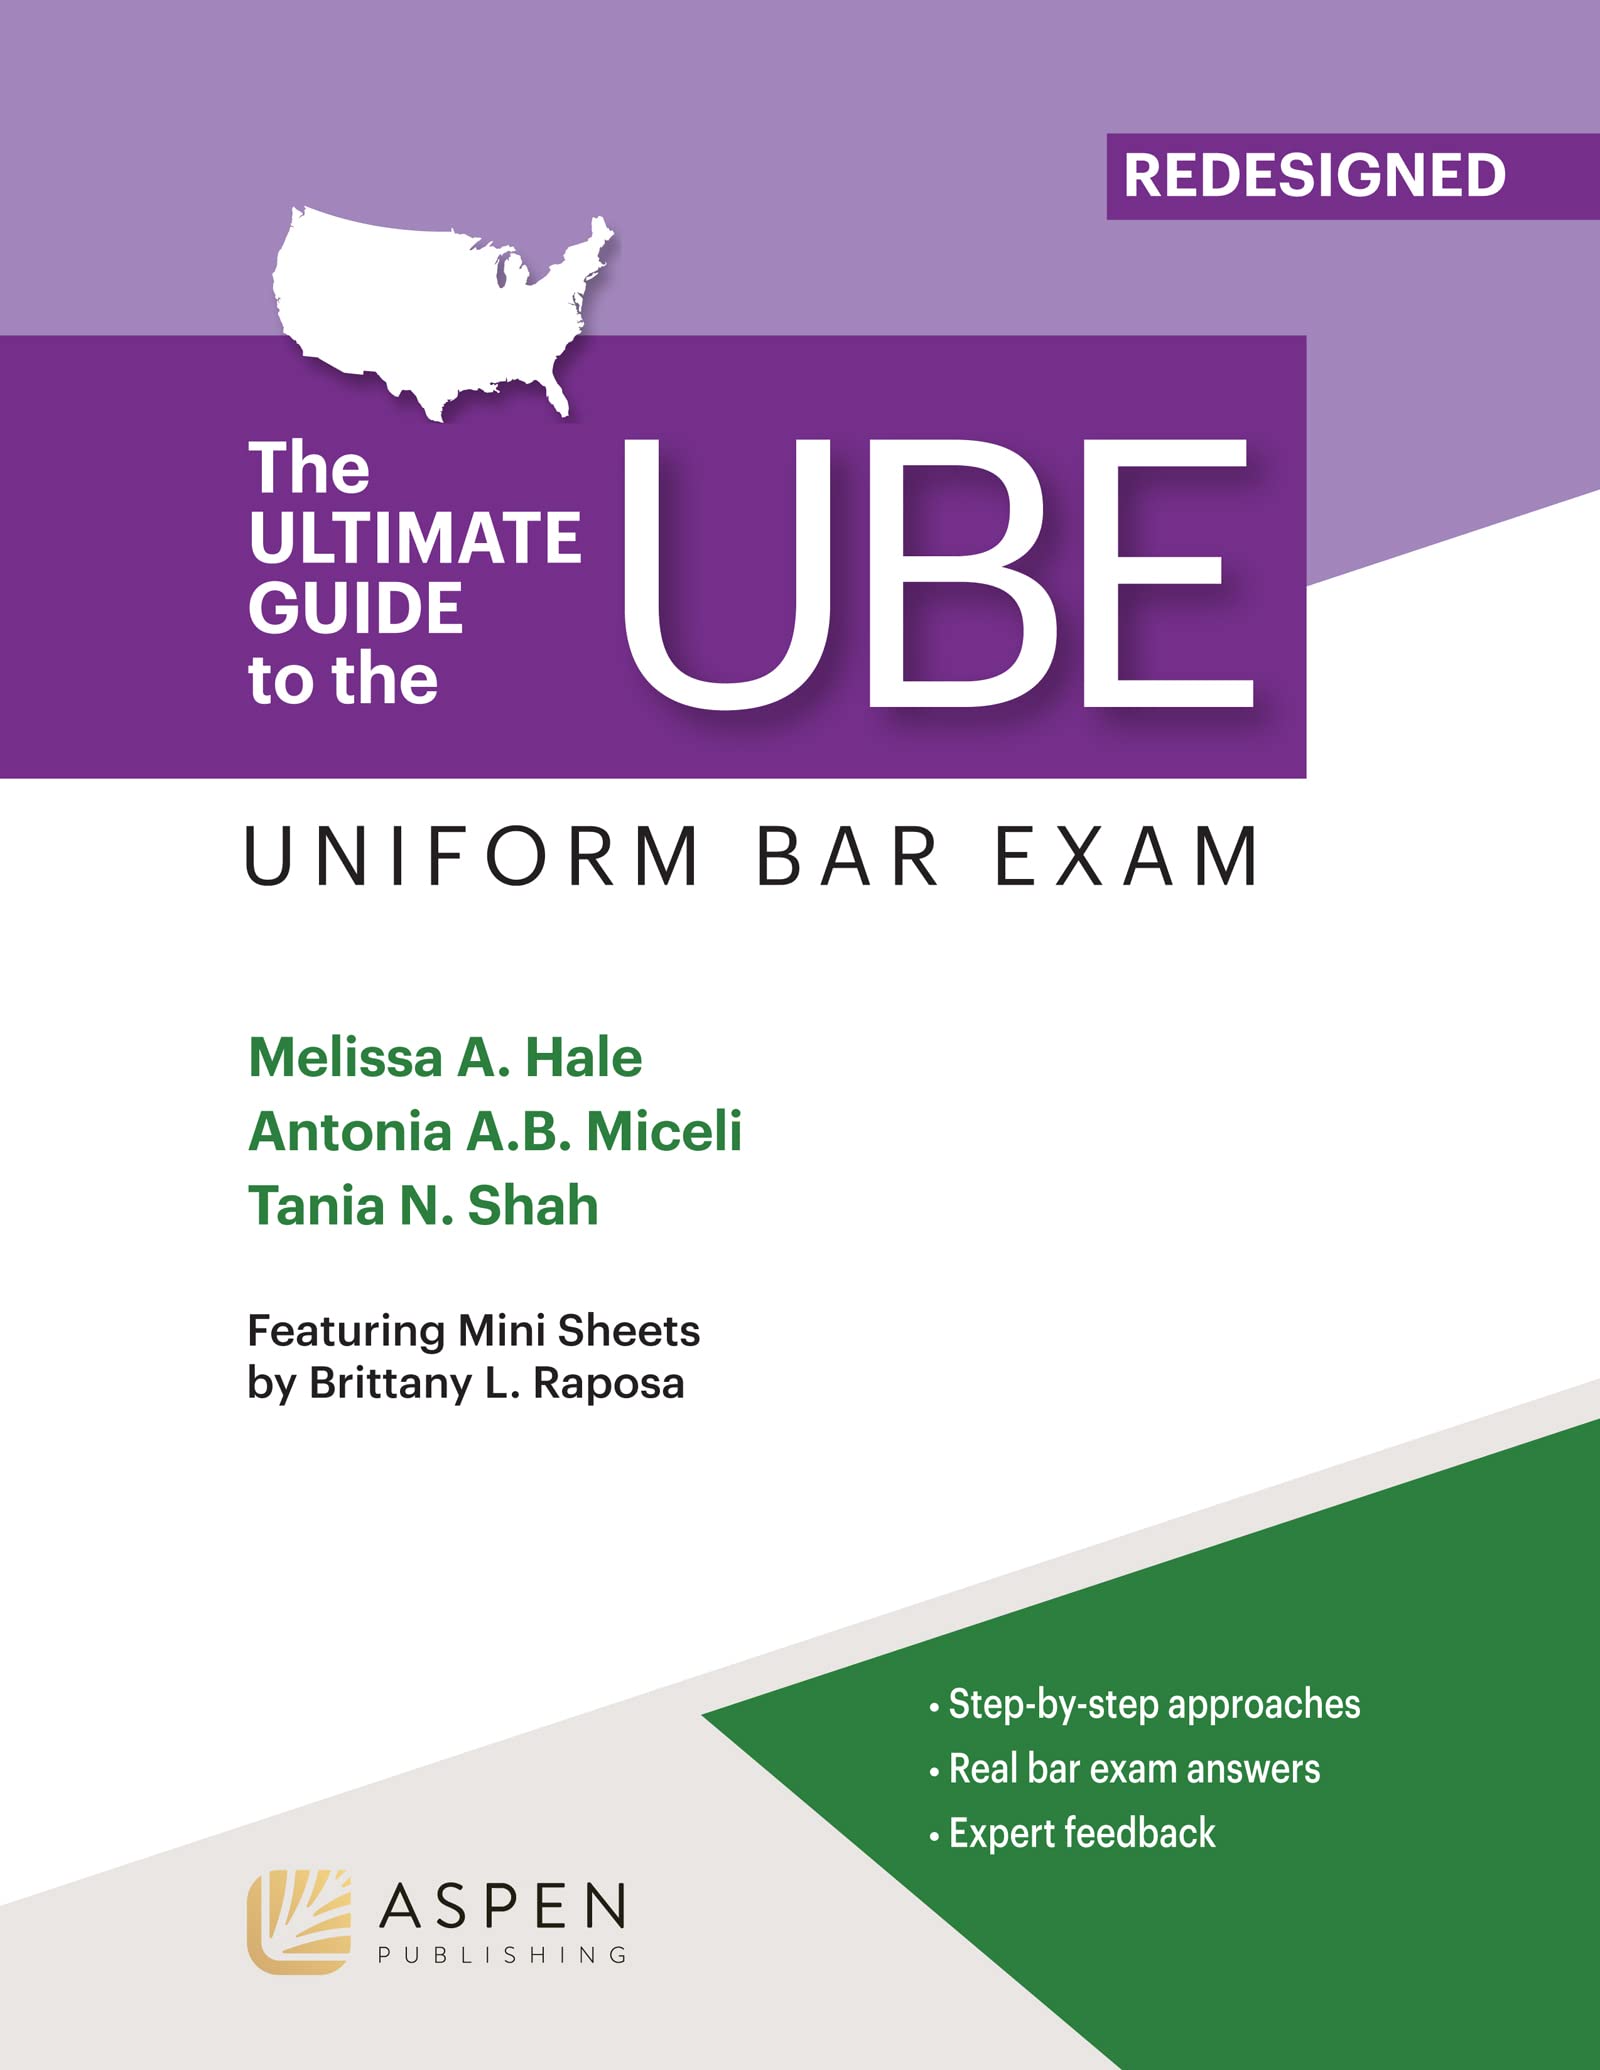 The Ultimate Guide to the UBE Redesigned (Bar Review) (The Bar Review)